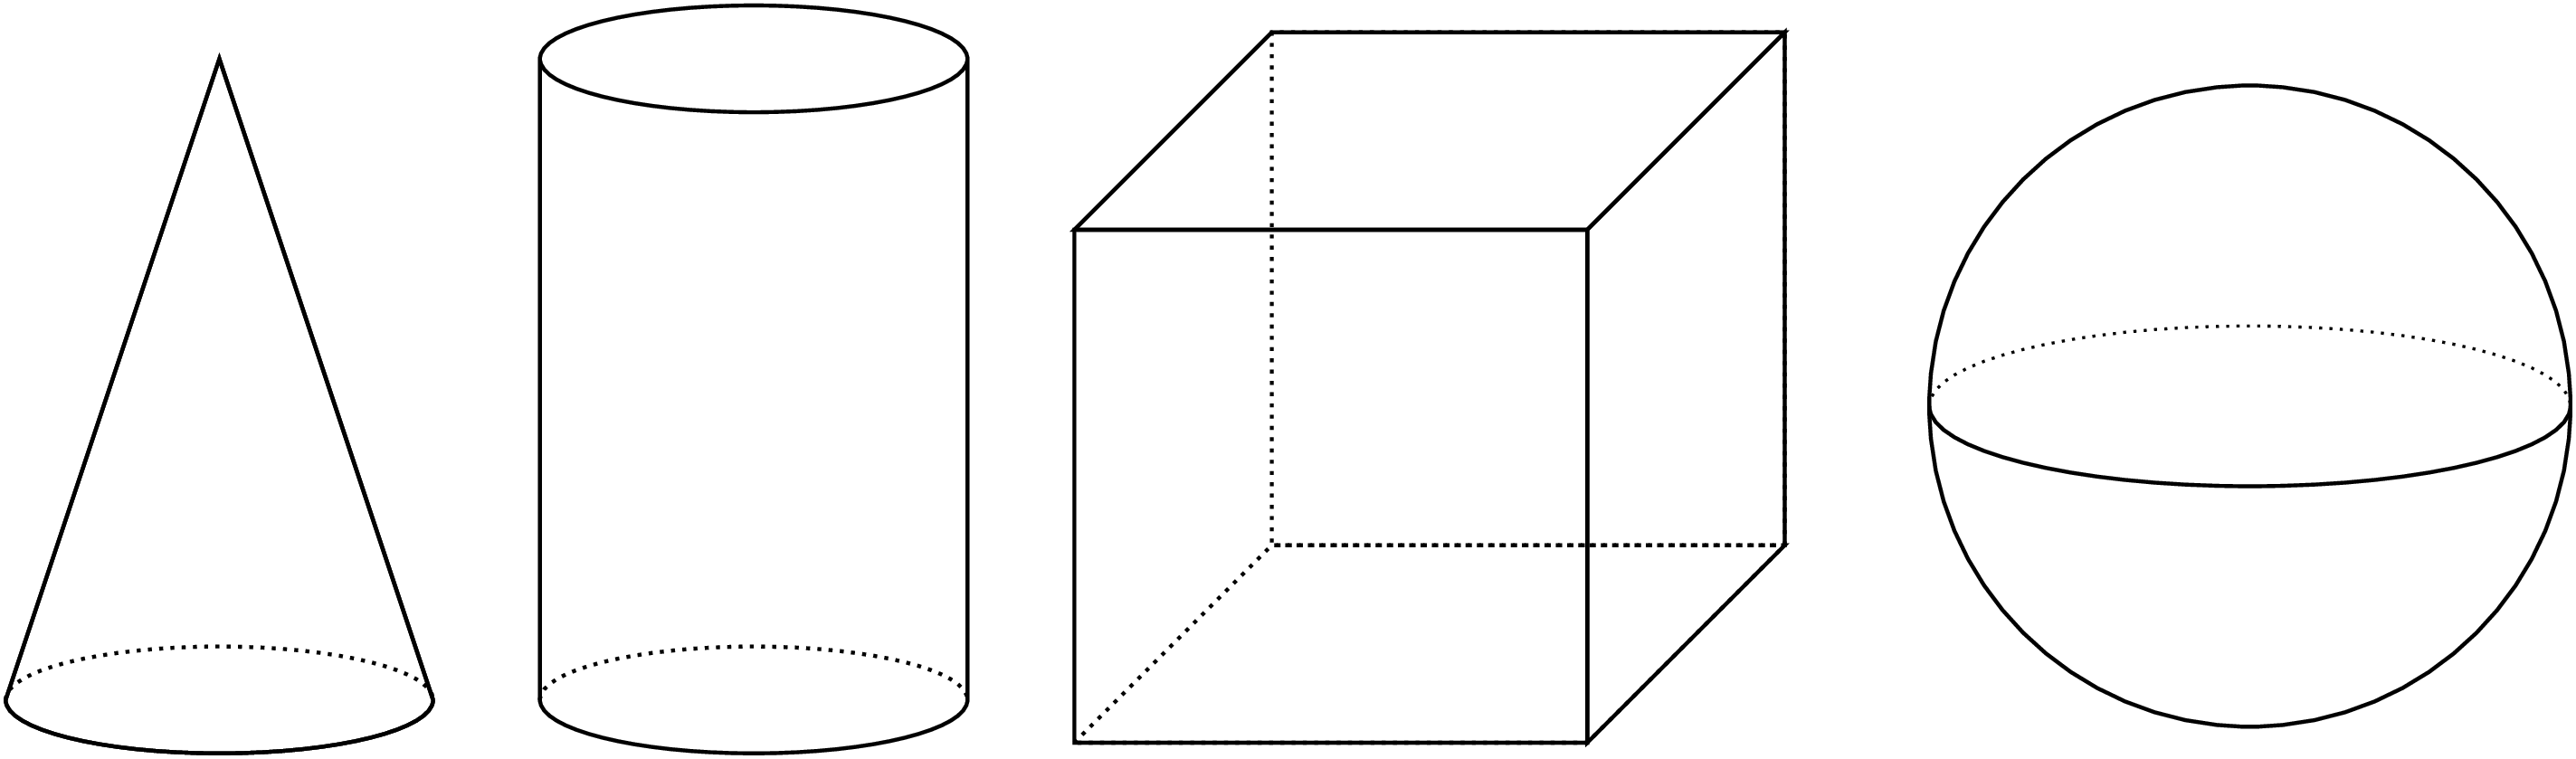 A cone, a cylinder, a cube and a sphere. On the cone's circular base, the front side of the base is solid and the back side of the base is a dotted curve. On the cylinder's circular base, the front side of the base is solid and the back side of the base is a dotted curve. On the cube, the back three edges are dotted. On the sphere's circumference, the front the front side of the curve is solid, the back side of the curve is dotted.